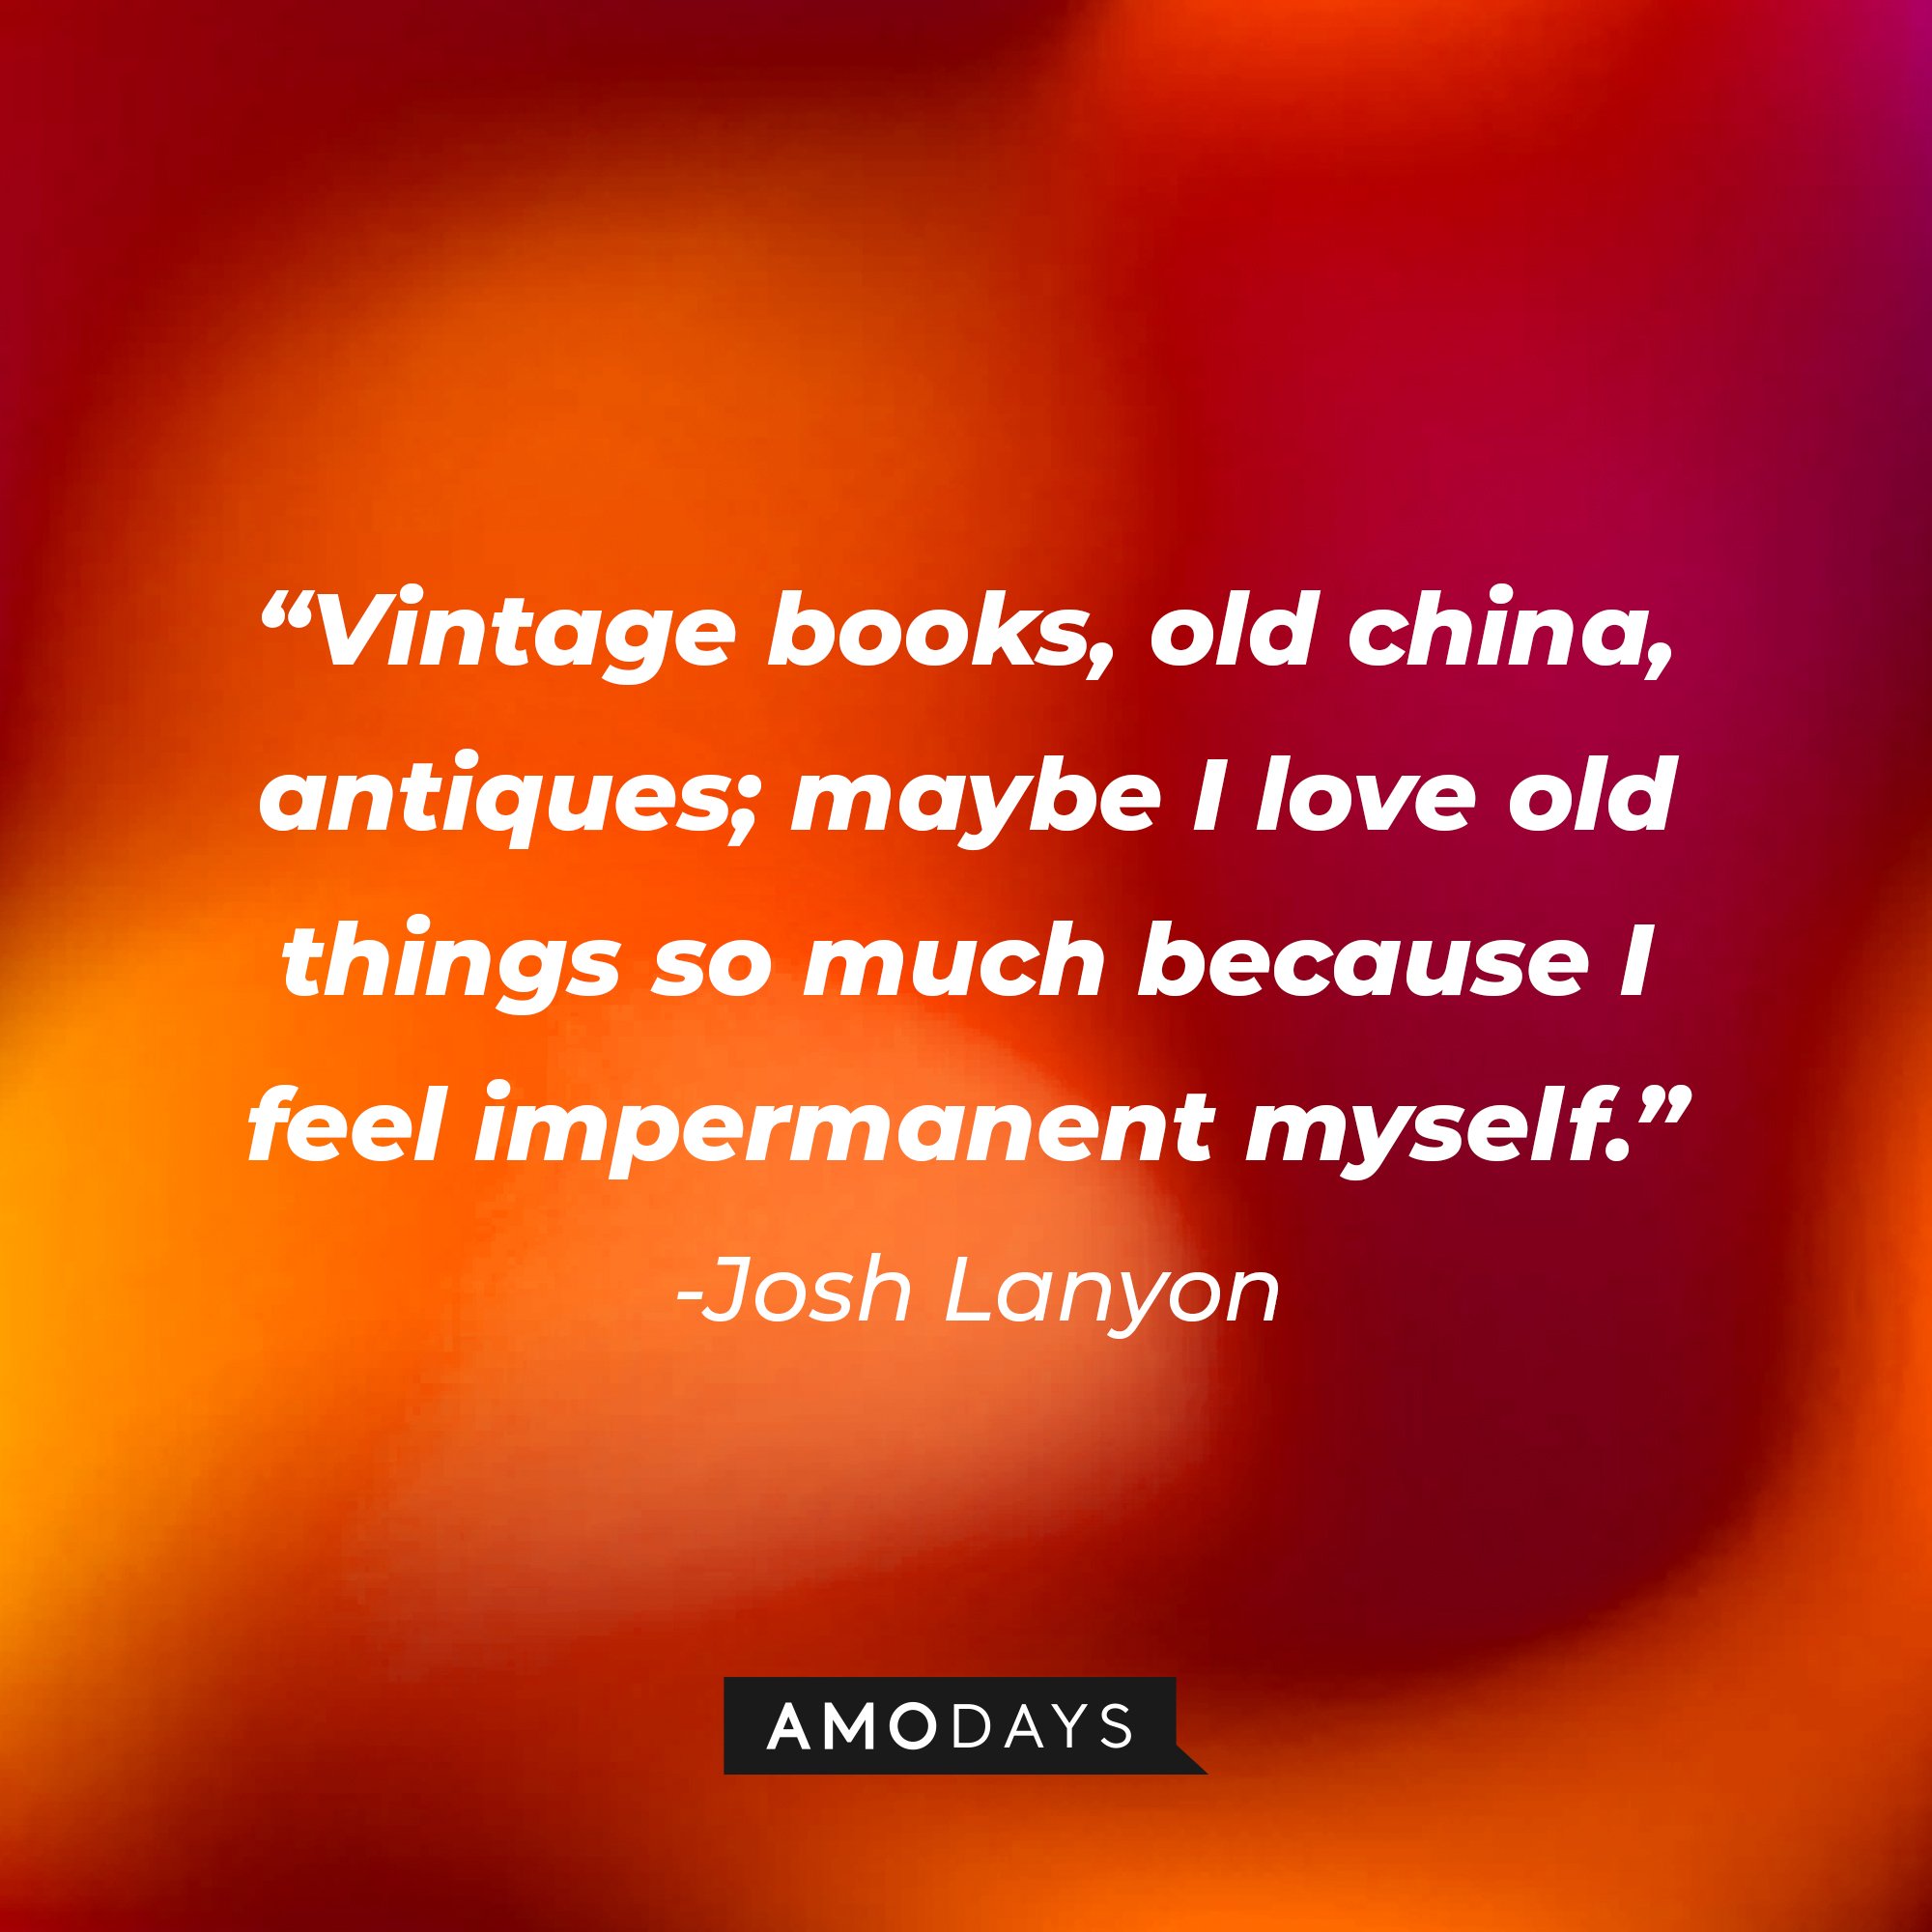 Josh Lanyon’s quote: "Vintage books, old china, antiques; maybe I love old things so much because I feel impermanent myself." | Image: AmoDays